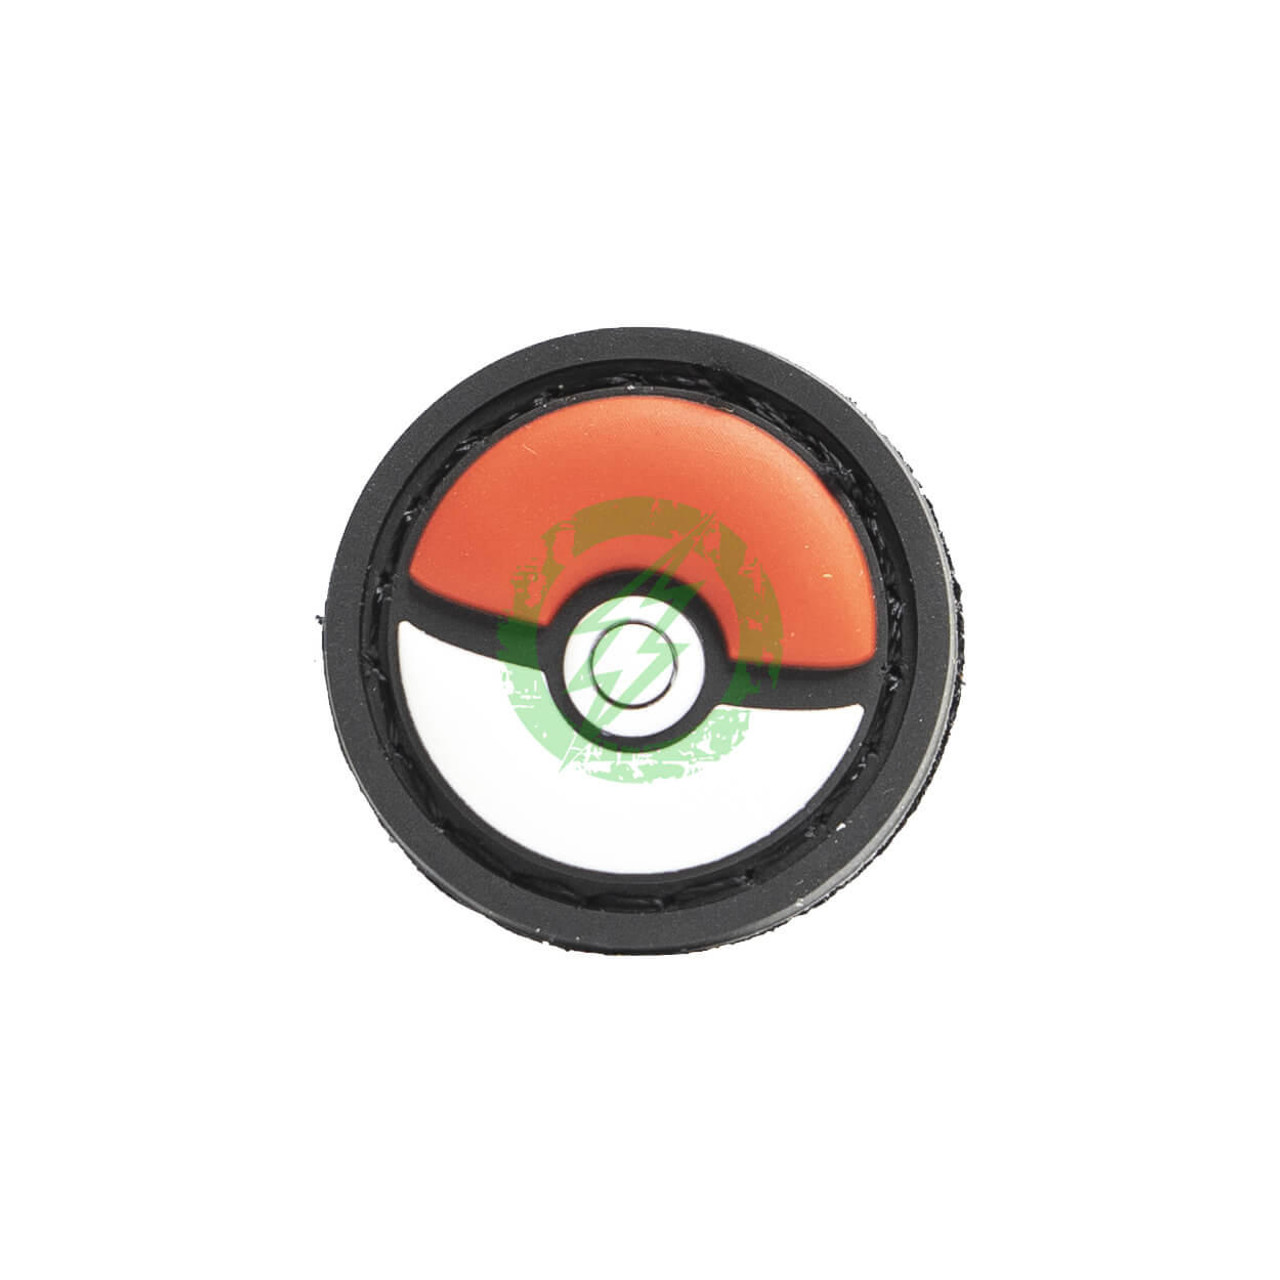  Tactical Outfitters Poke Ball PVC Cat Eye Morale Patch 